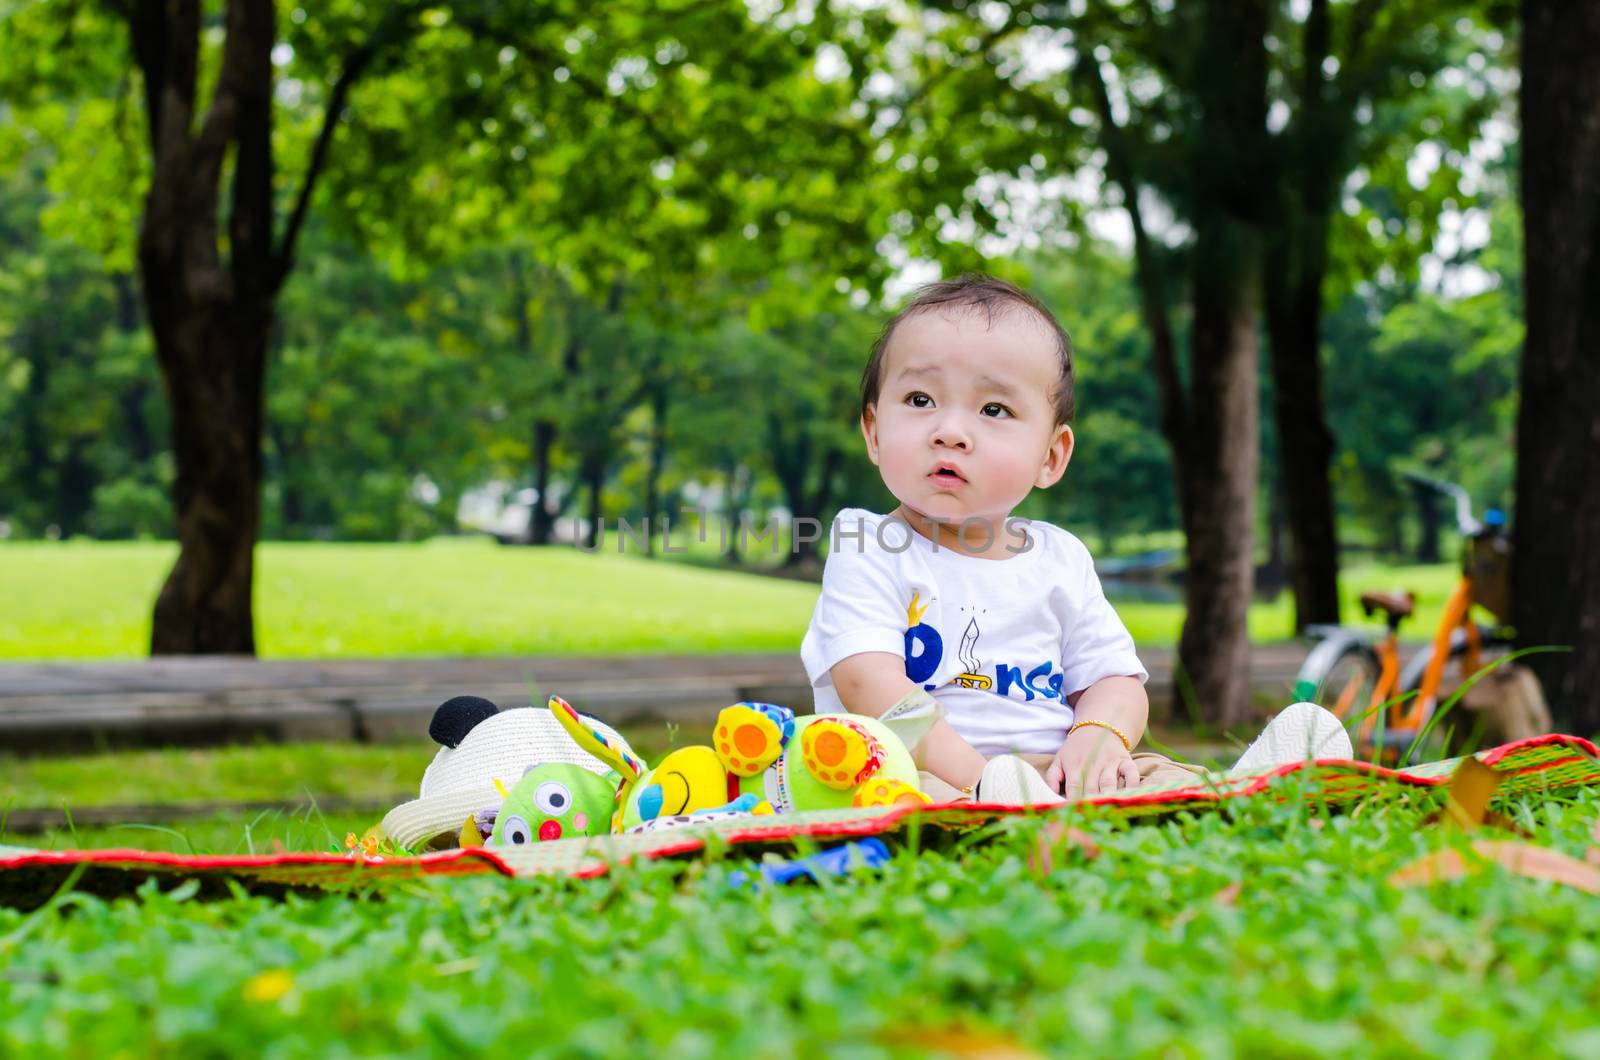 Baby in tha park by chatchai